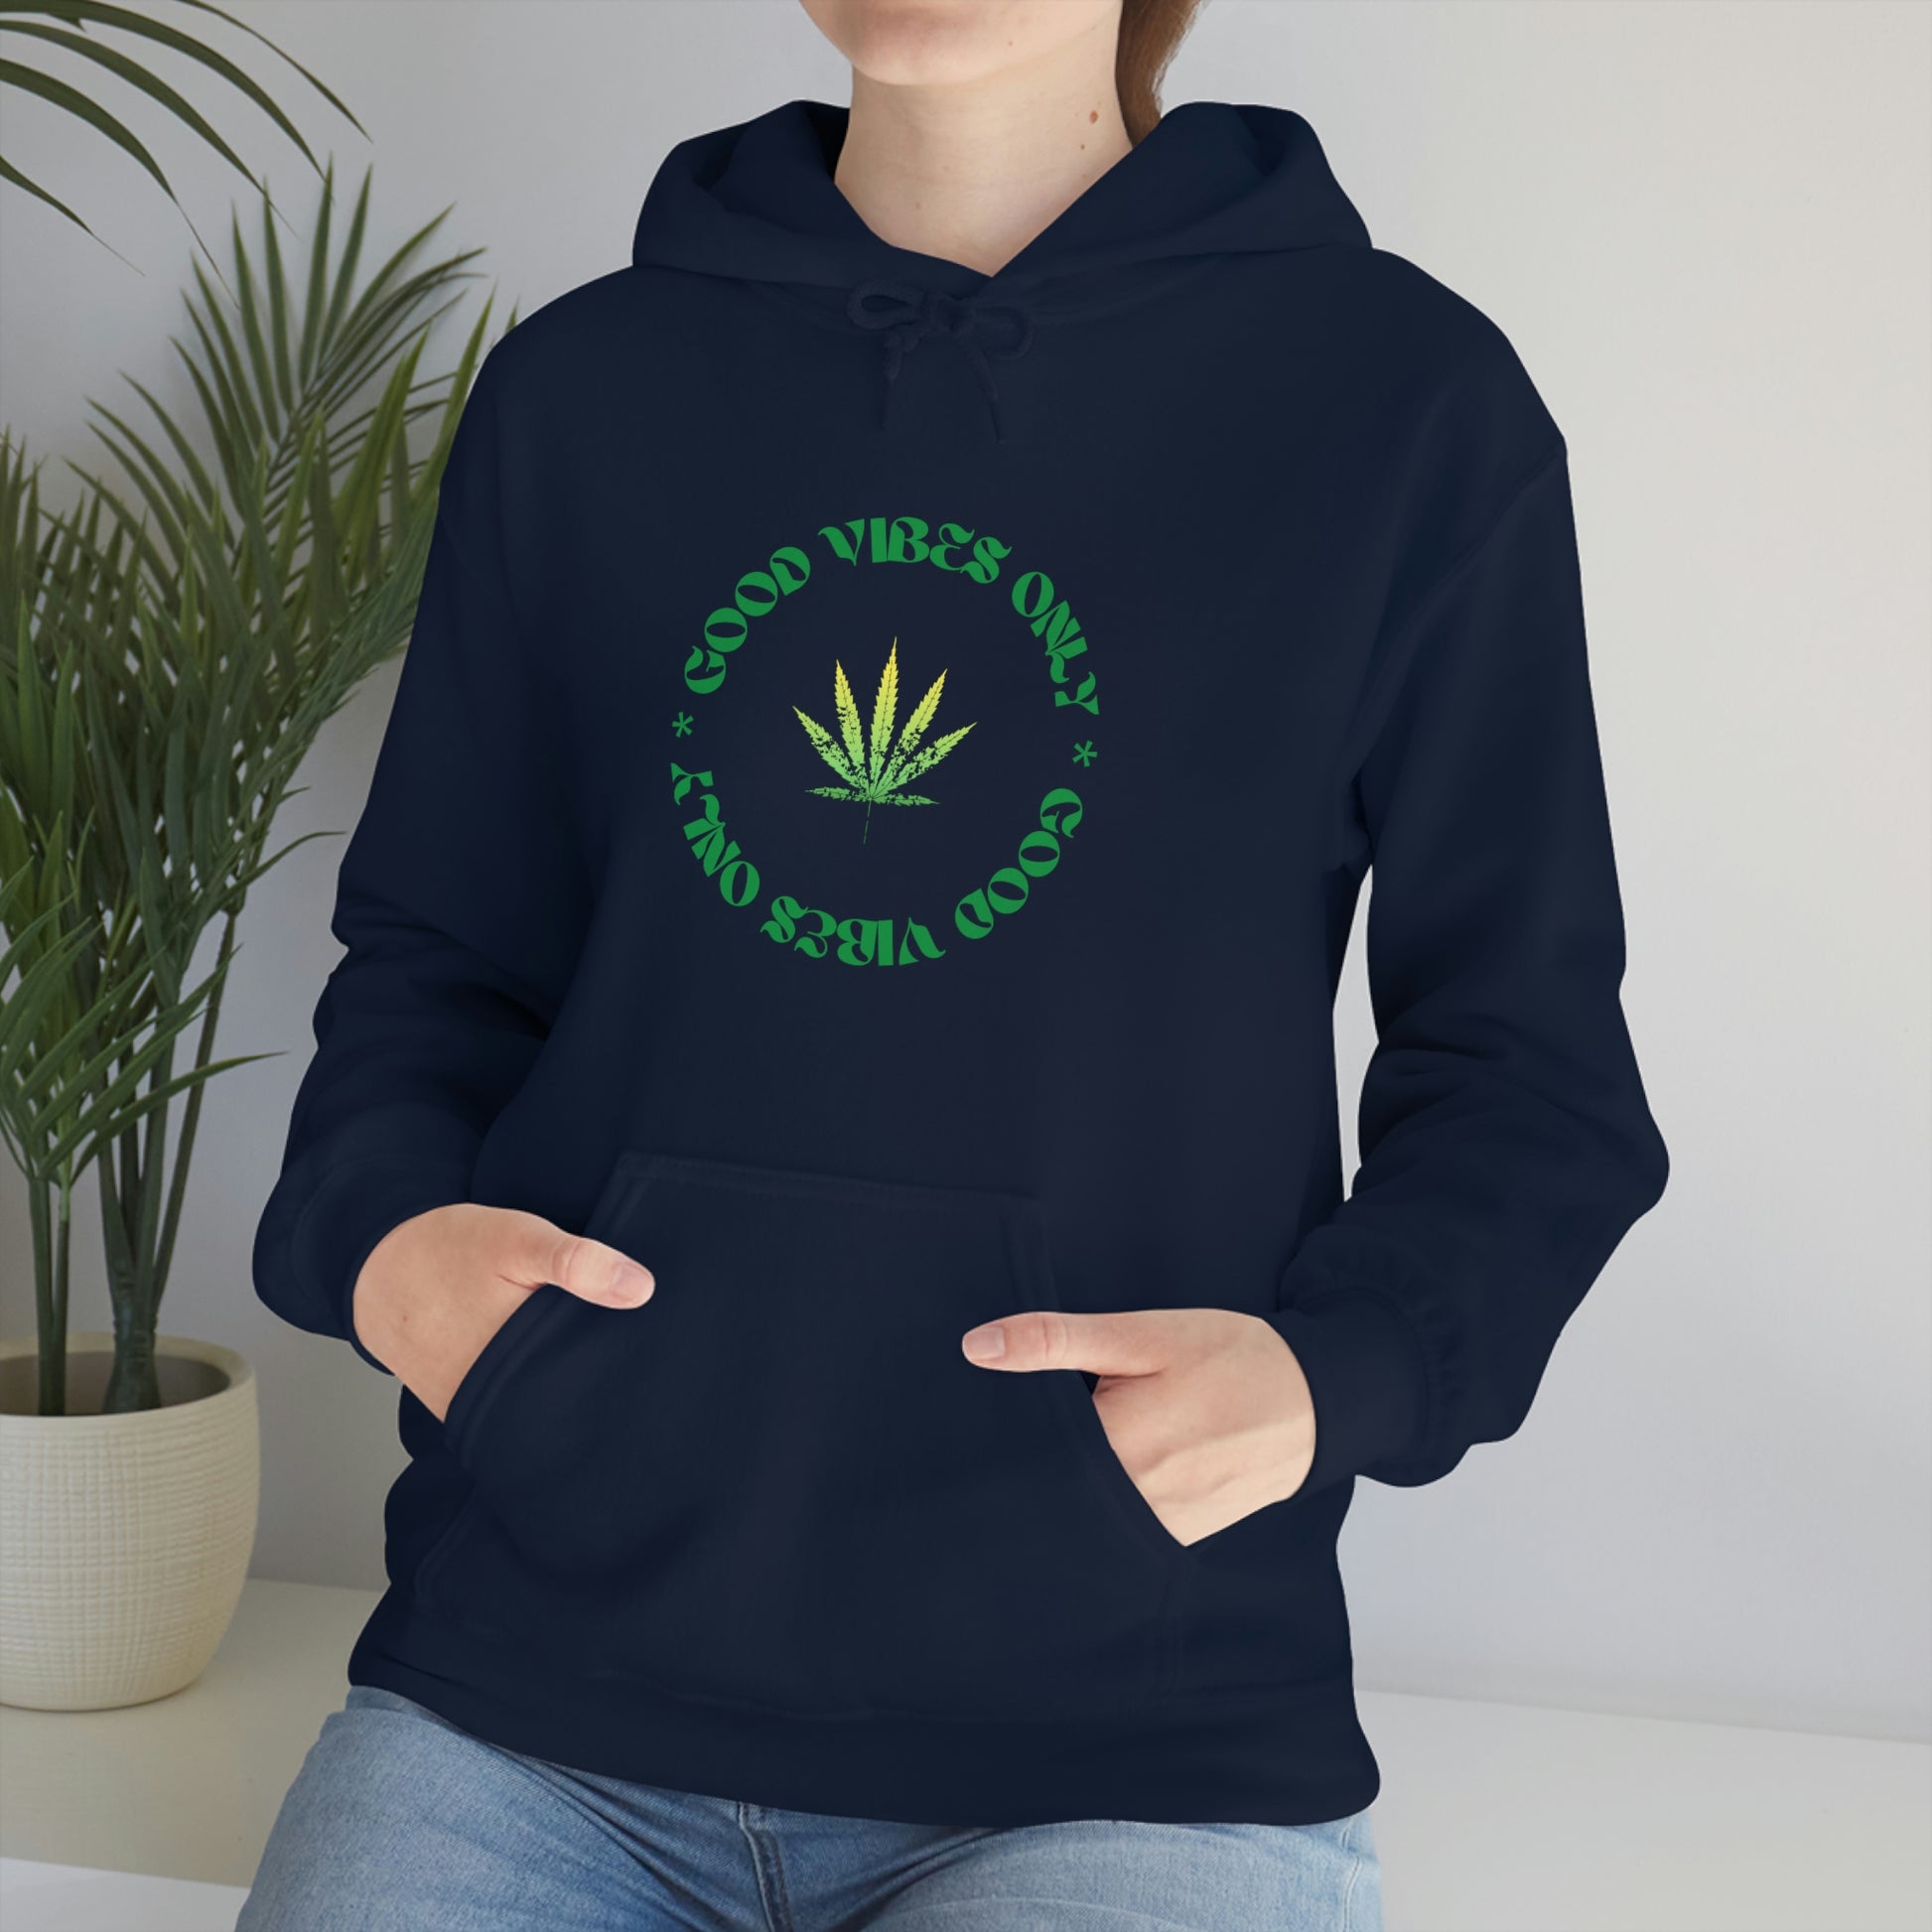 A woman wearing a Good Vibes Only Weed Sweater.